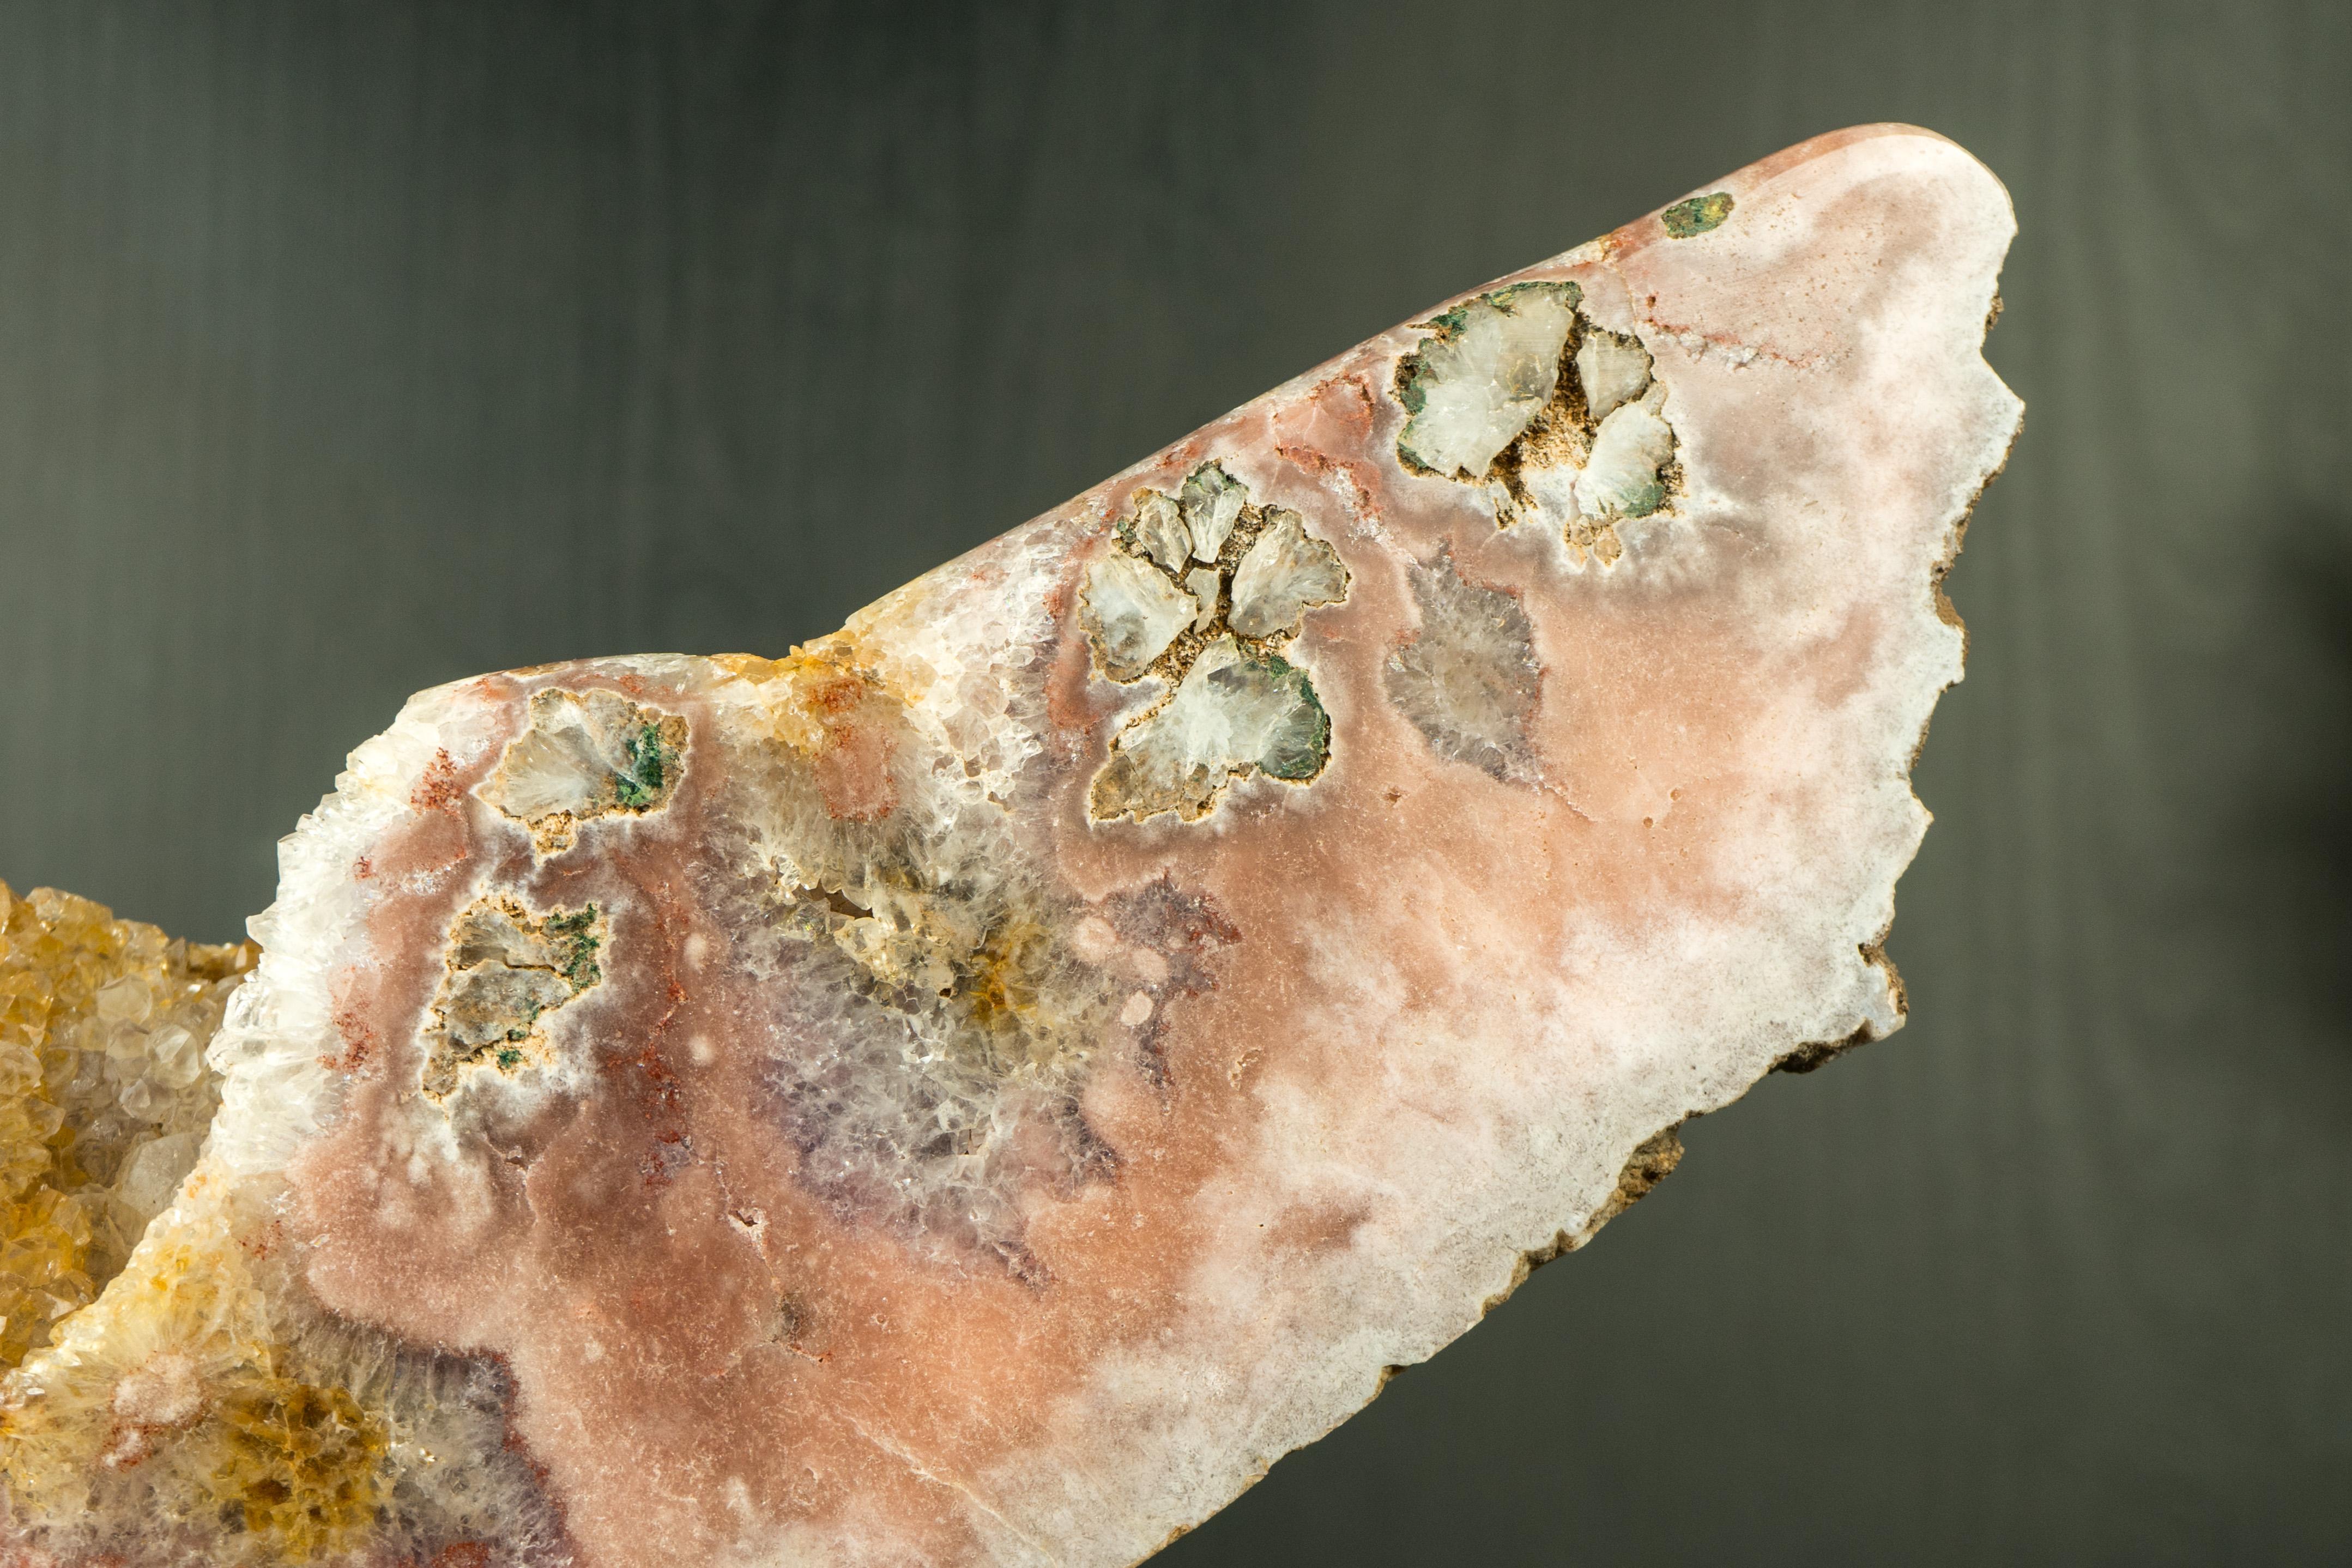 Brazilian Pink Amethyst Geode with a Natural Sculpture of an Abstract Wing, Natural Art For Sale